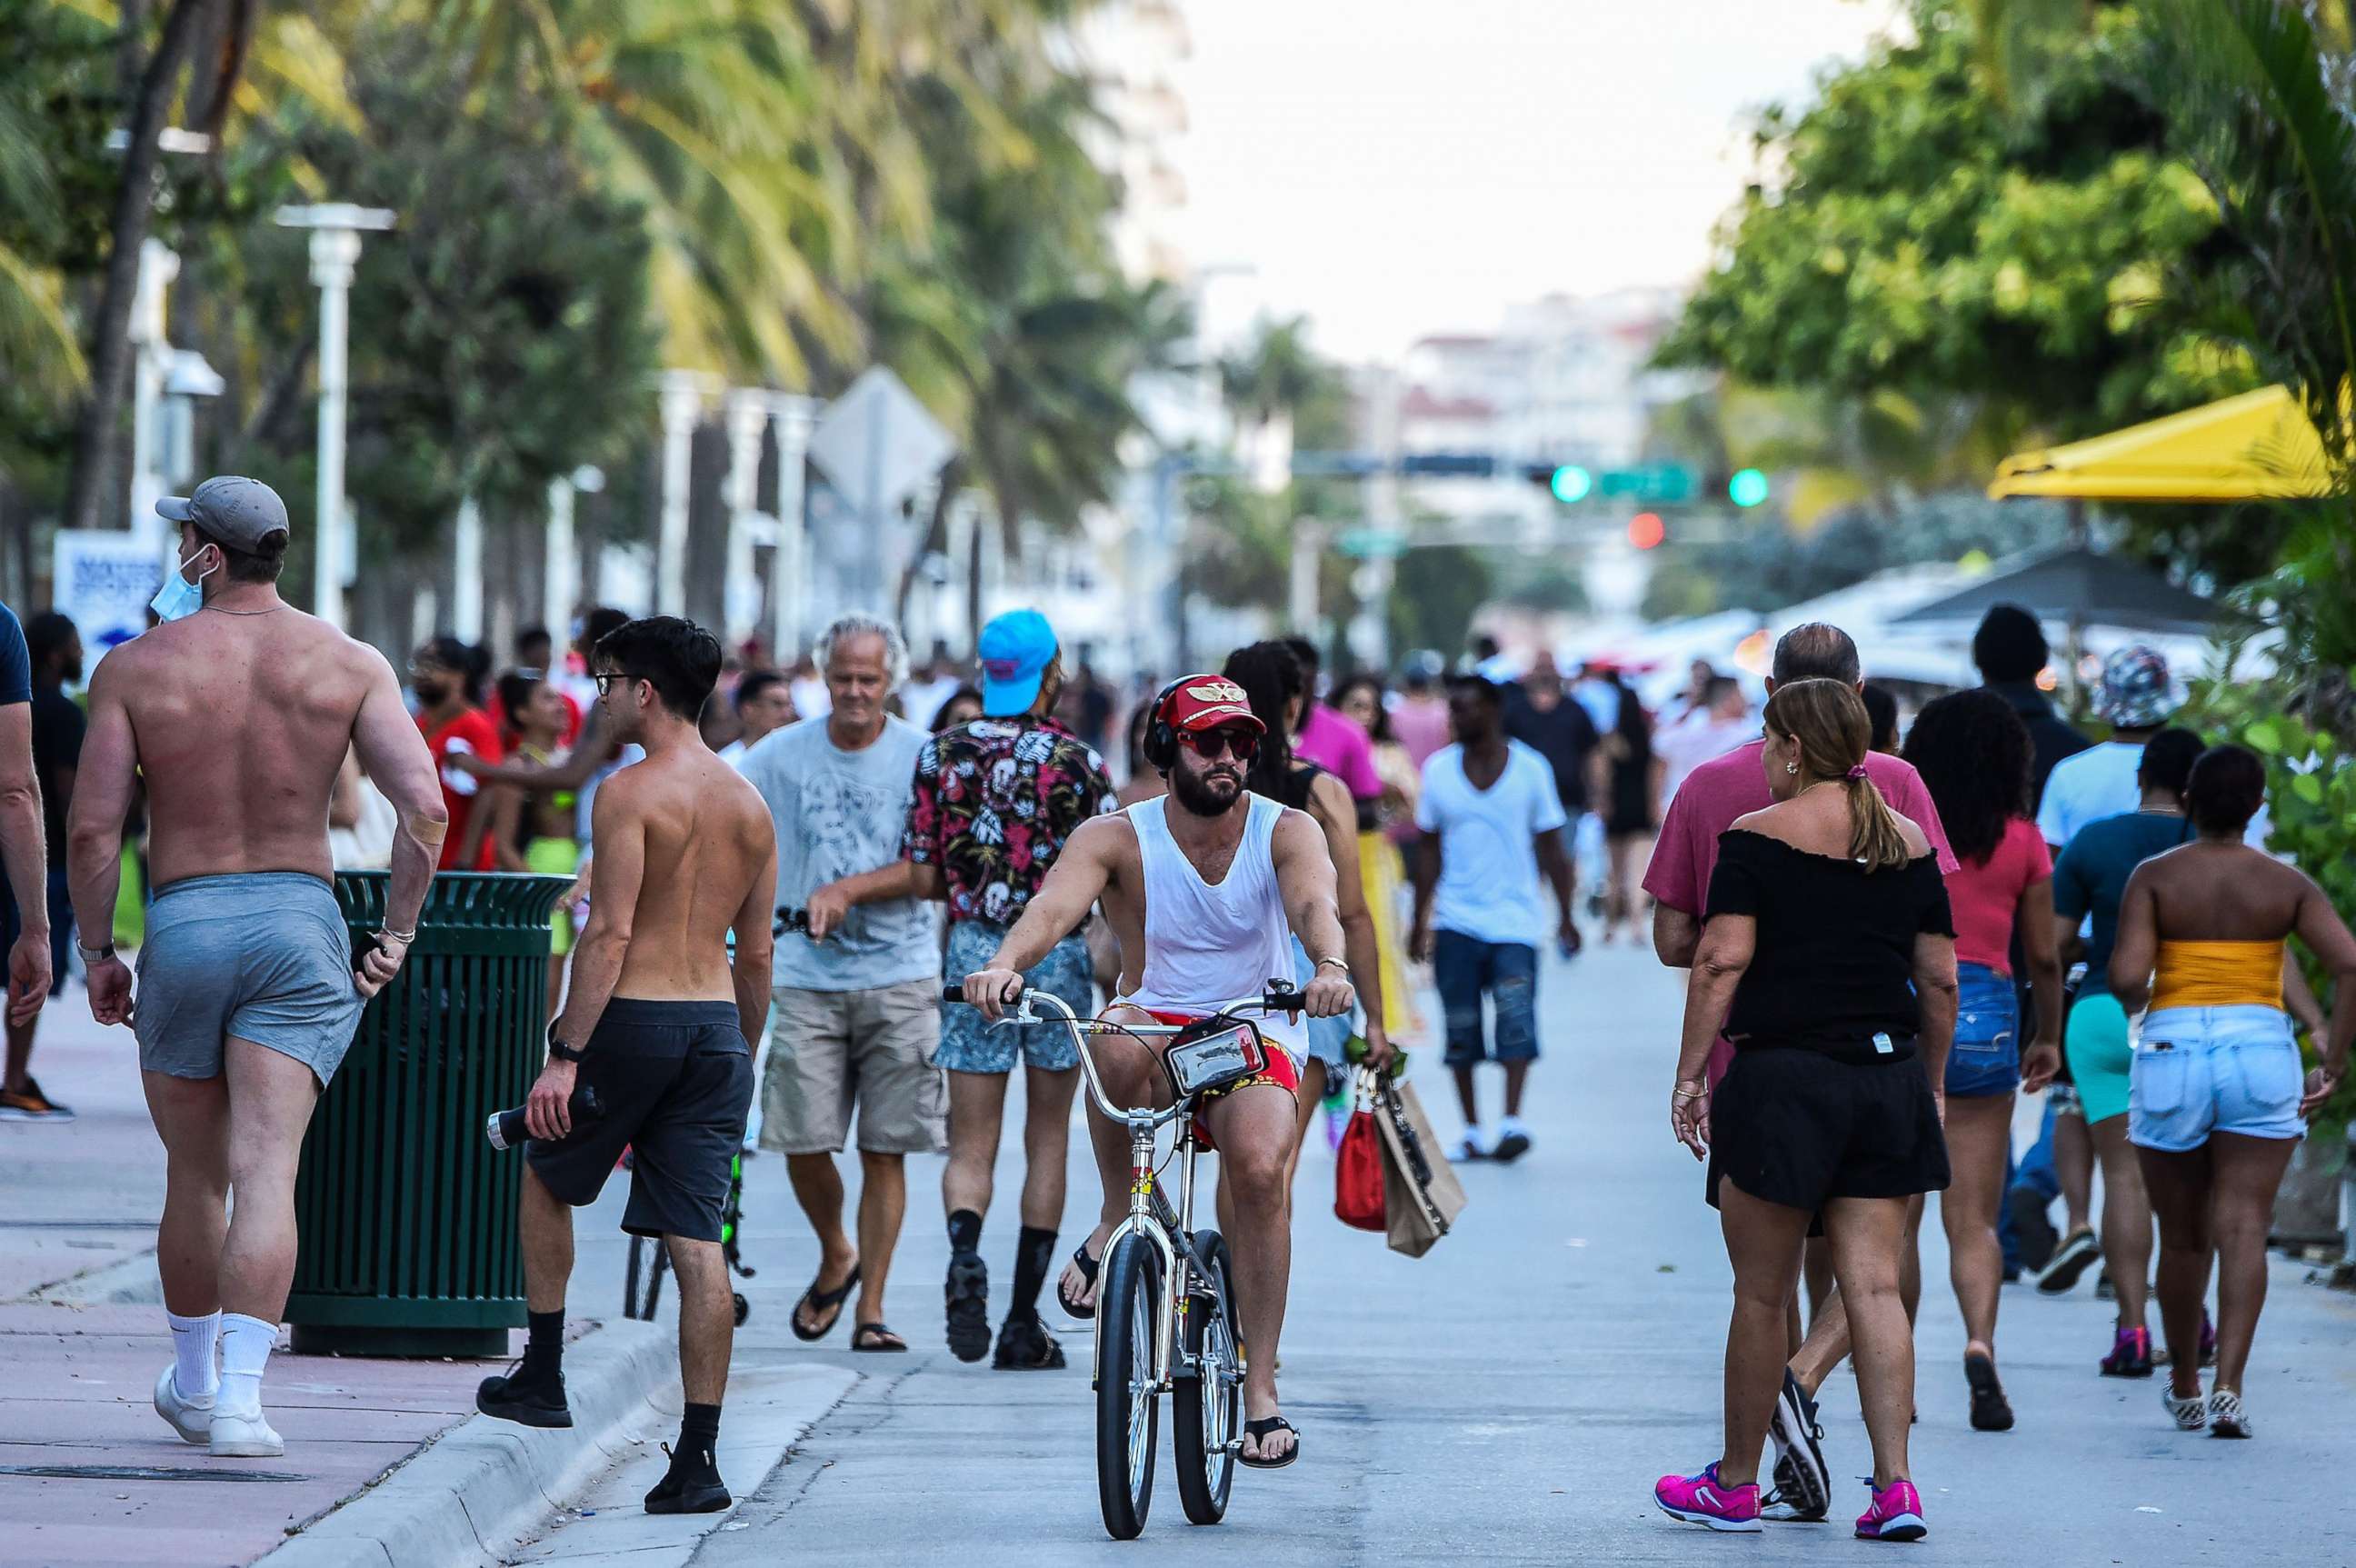 PHOTO: A man rides a bicycle as people walk on Ocean Drive in Miami Beach on June 26, 2020.